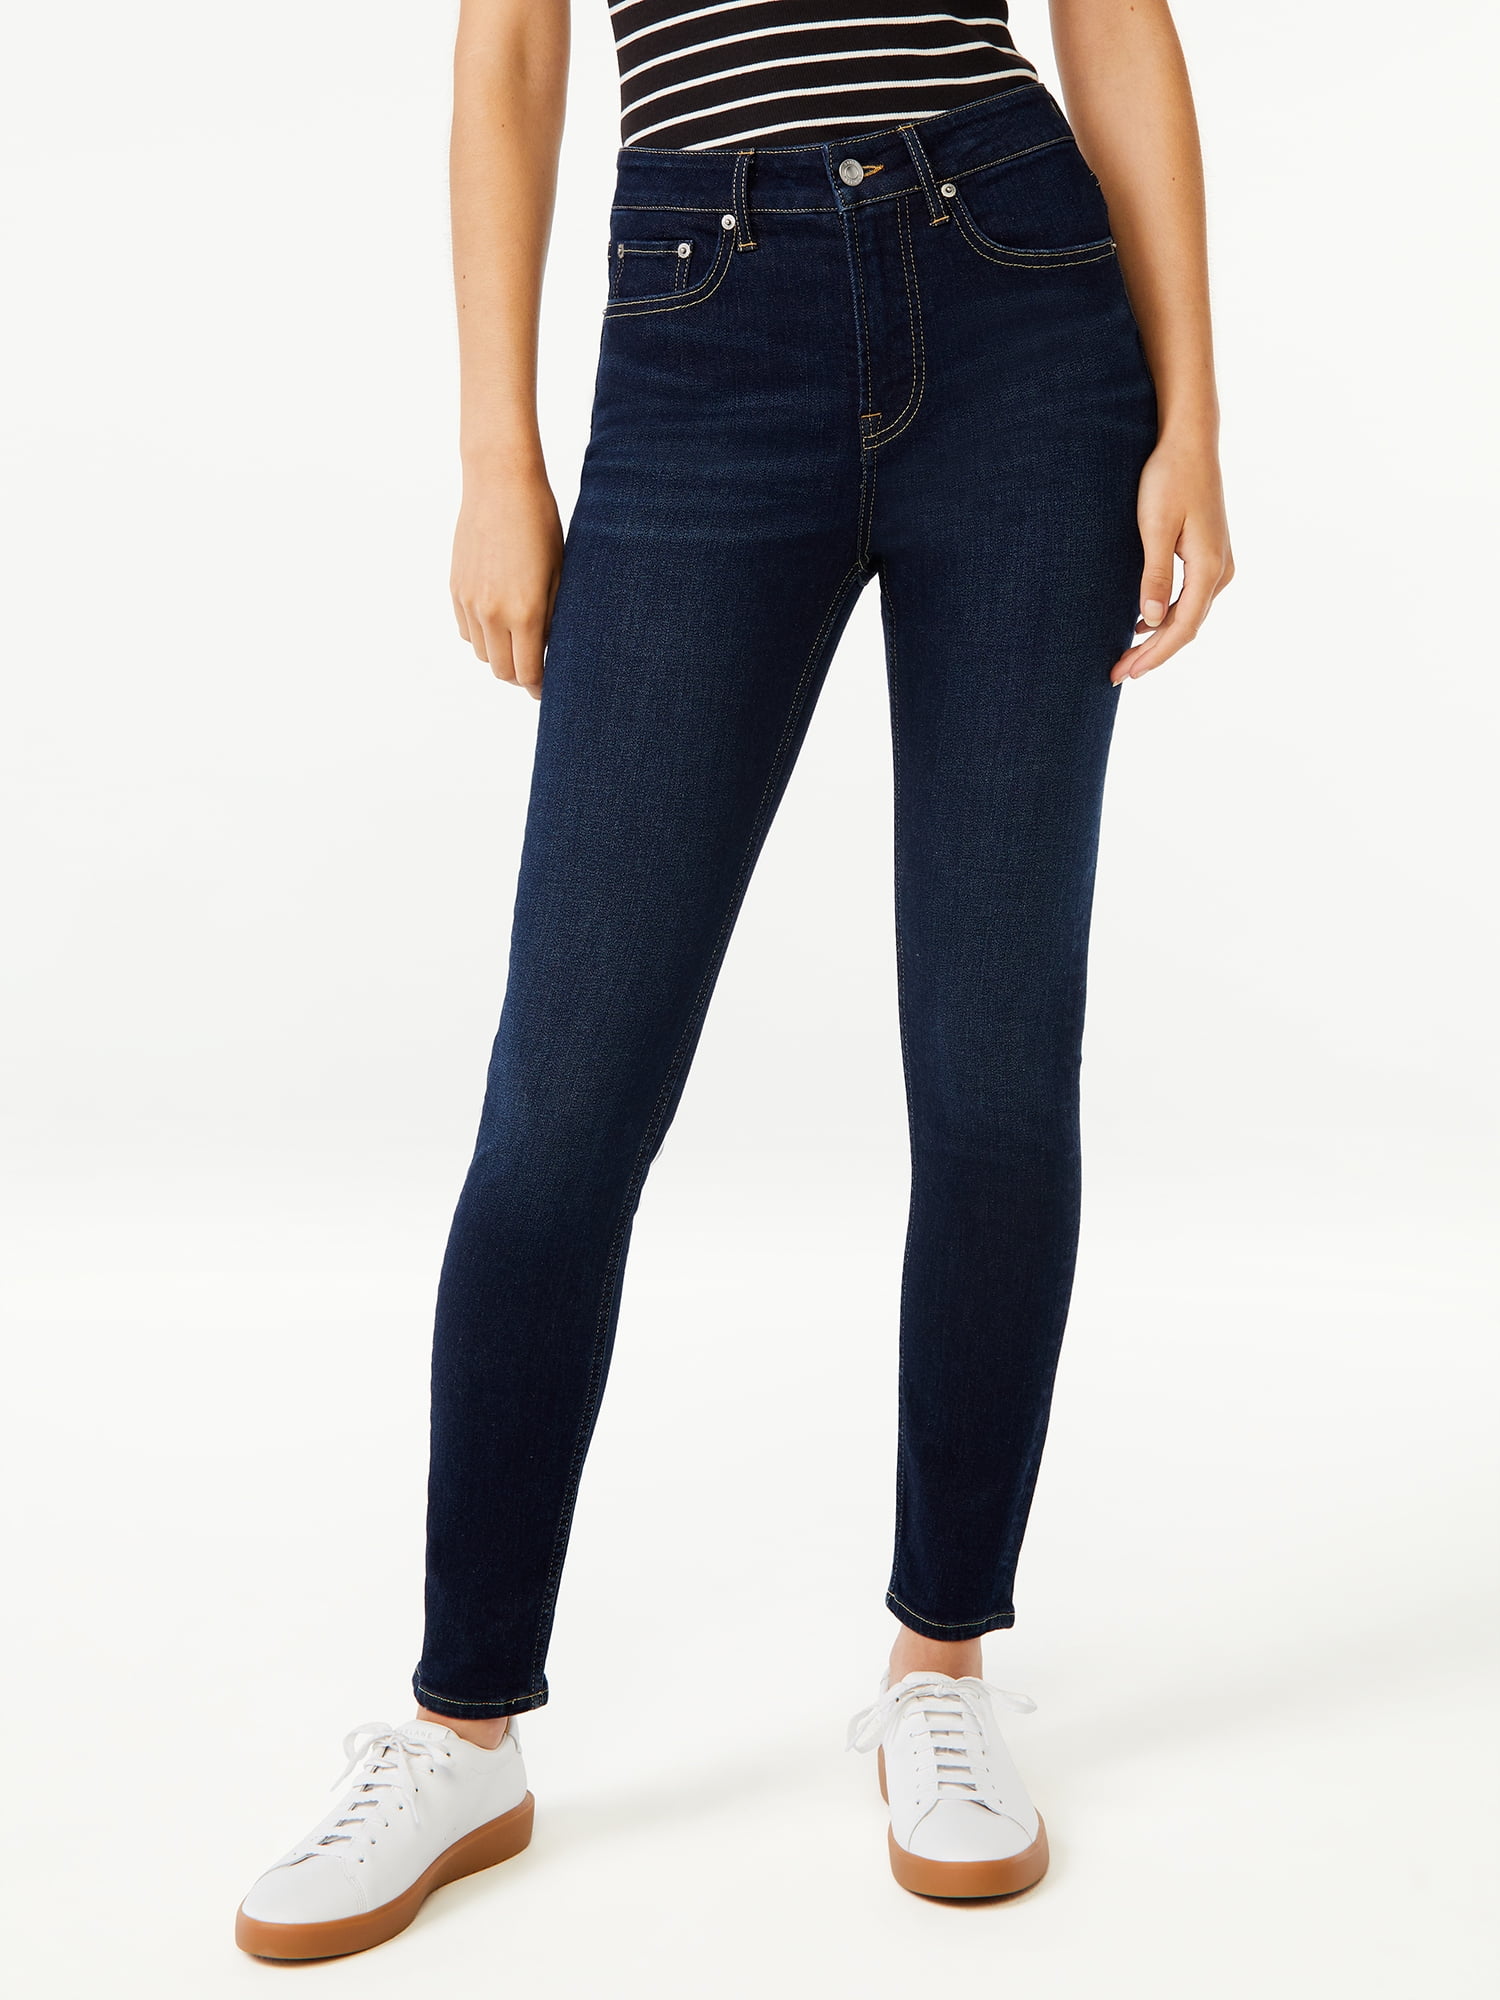 Free Assembly Women's High Rise Skinny Jeans - Walmart.com